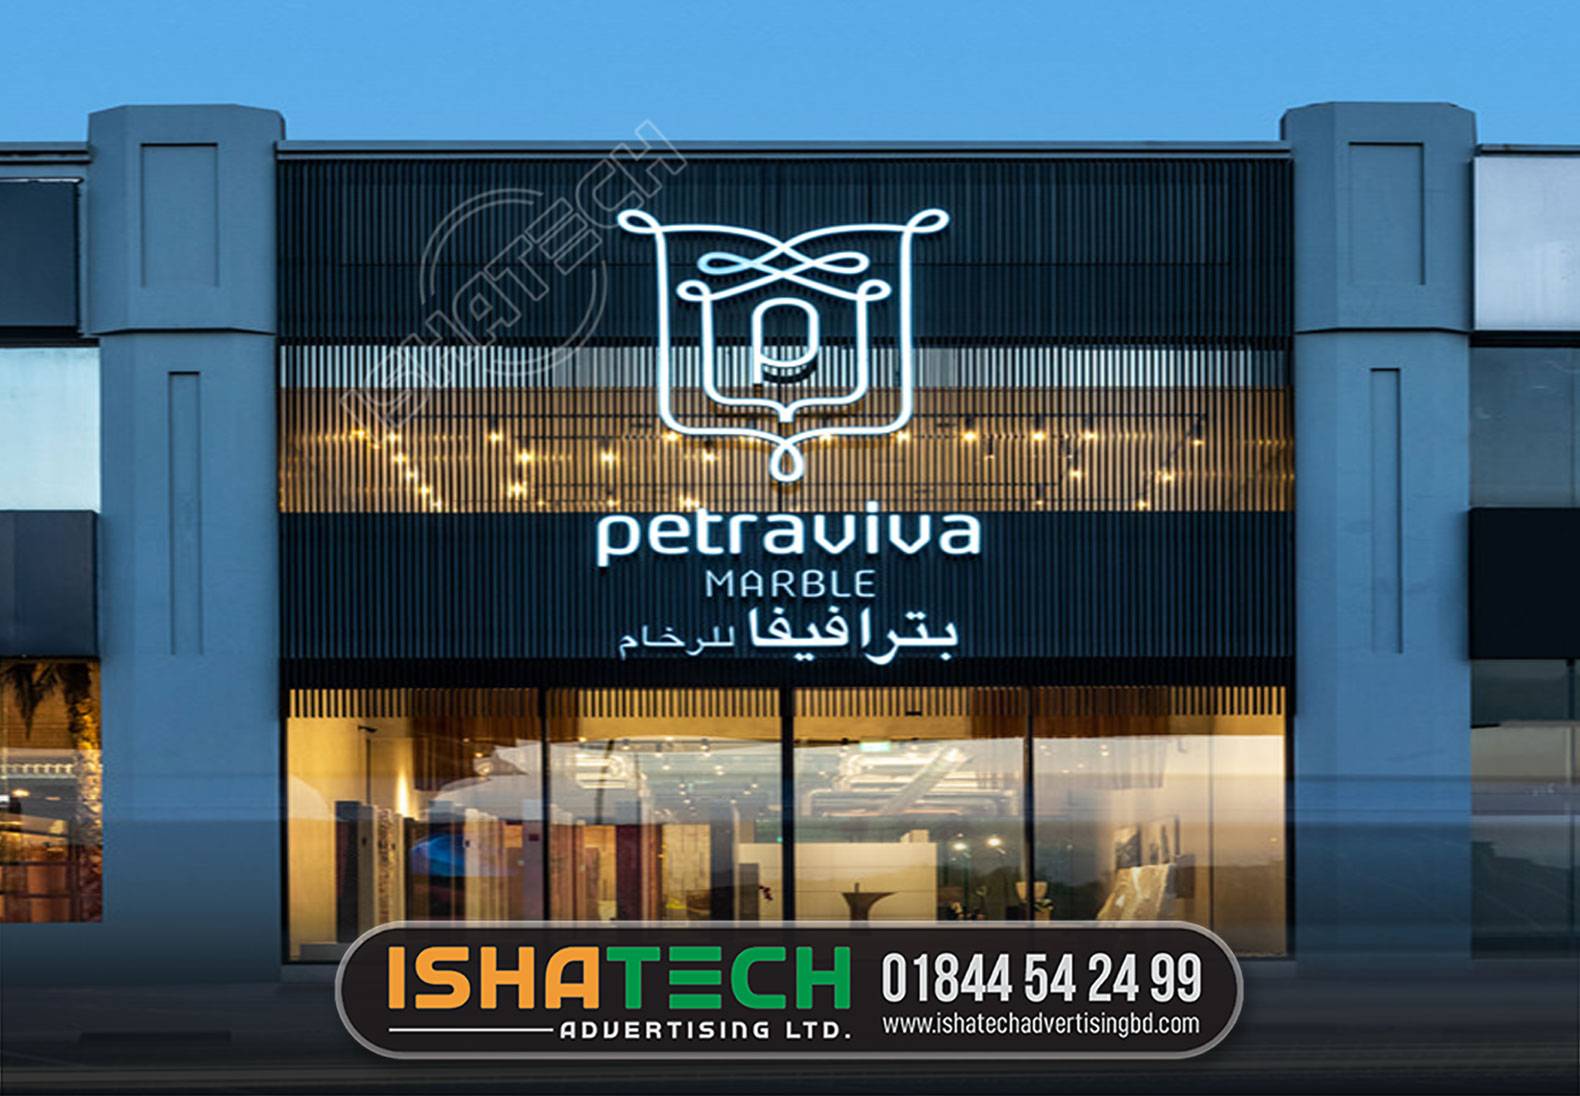 PETRAVIVA SHOPPING MALL LED SIGNAGE BD BY ISHATECH ADVERTISING LTD